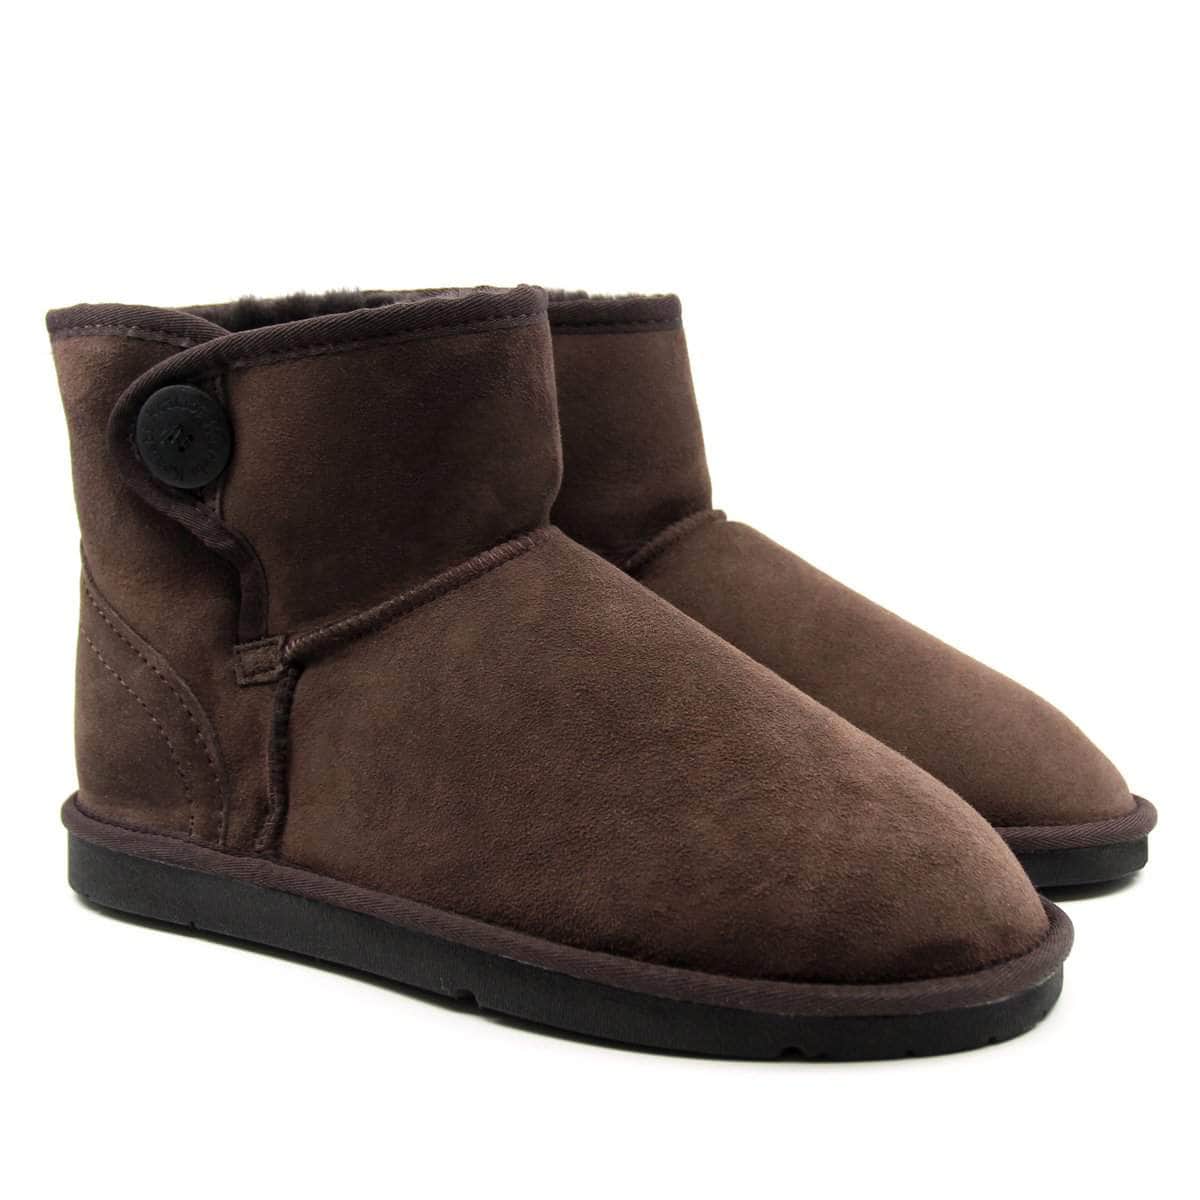 UGG Mini Button Boots